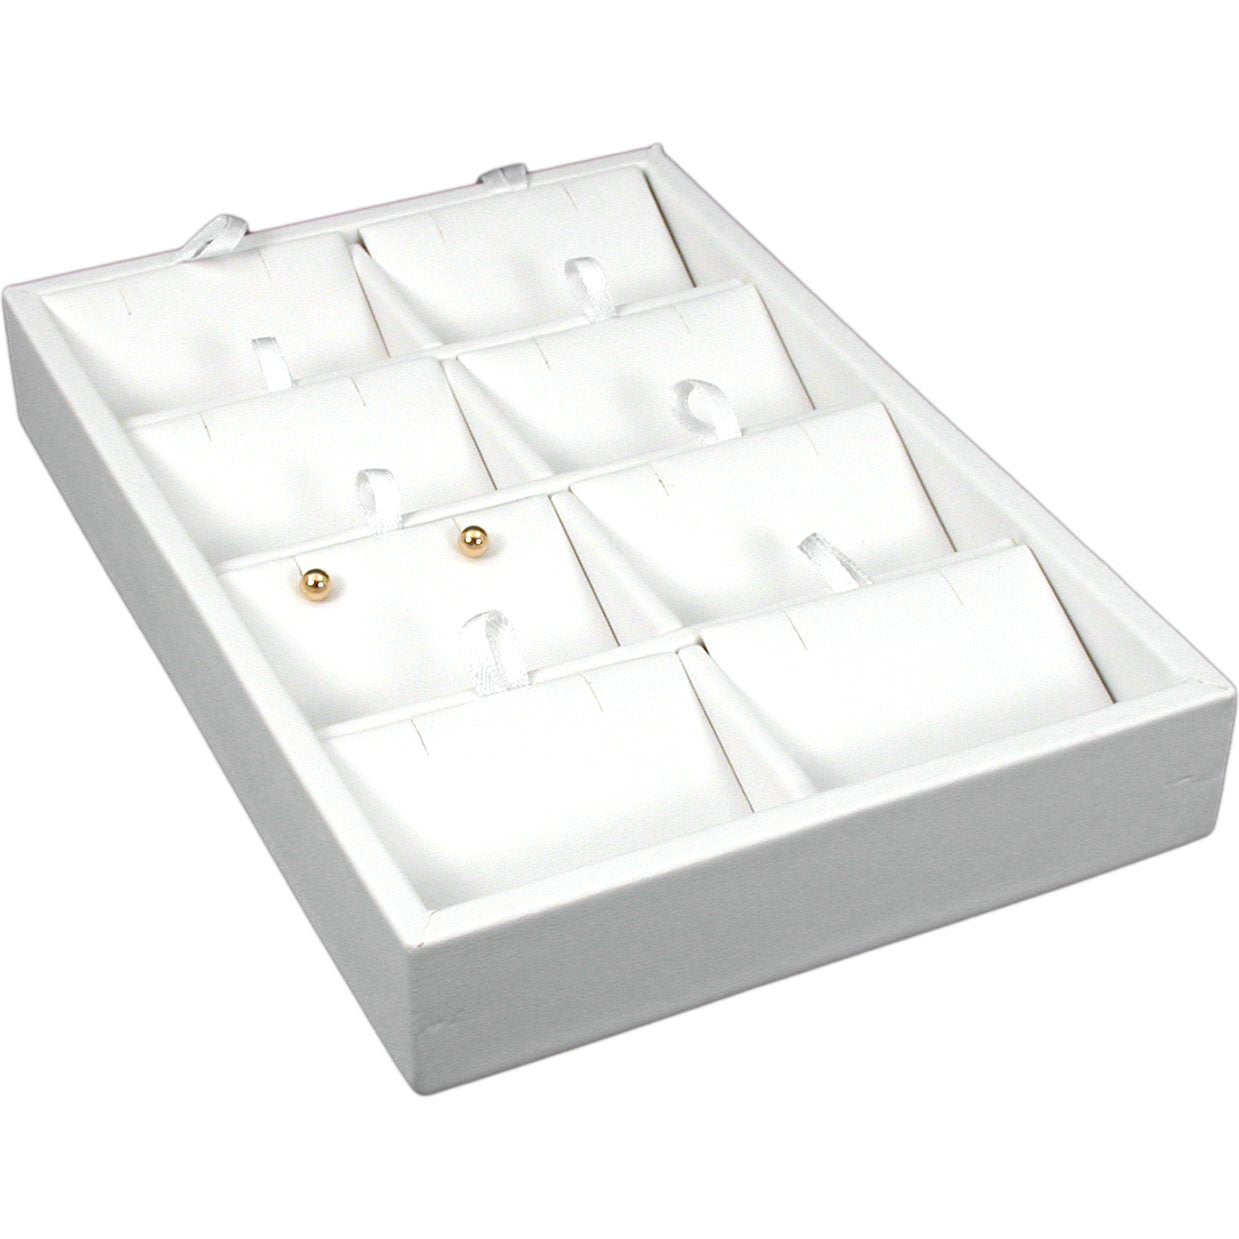 8 Slot Pendant Display Tray White Faux Leather 5"